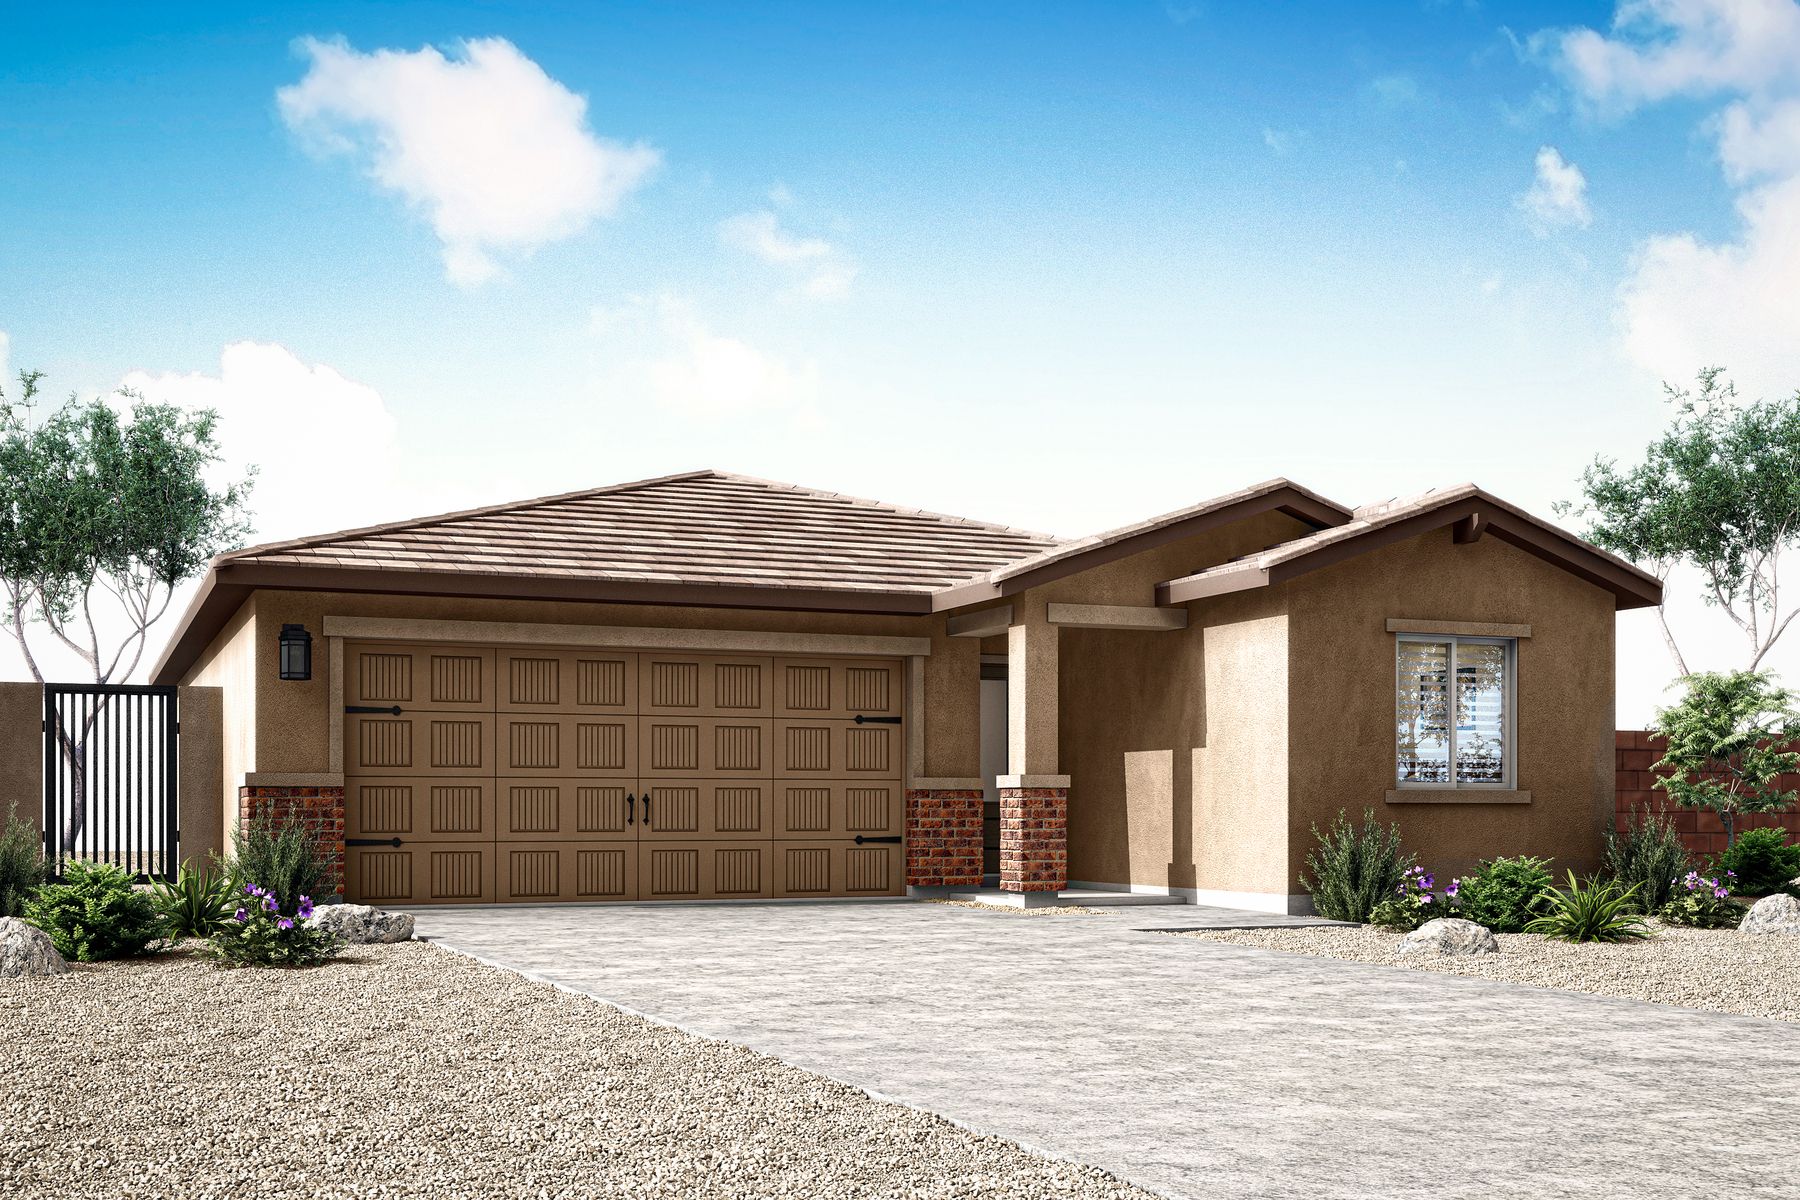 Rendering of the Ash at Bisbee Ranch.:LGI Homes at Bisbee Ranch